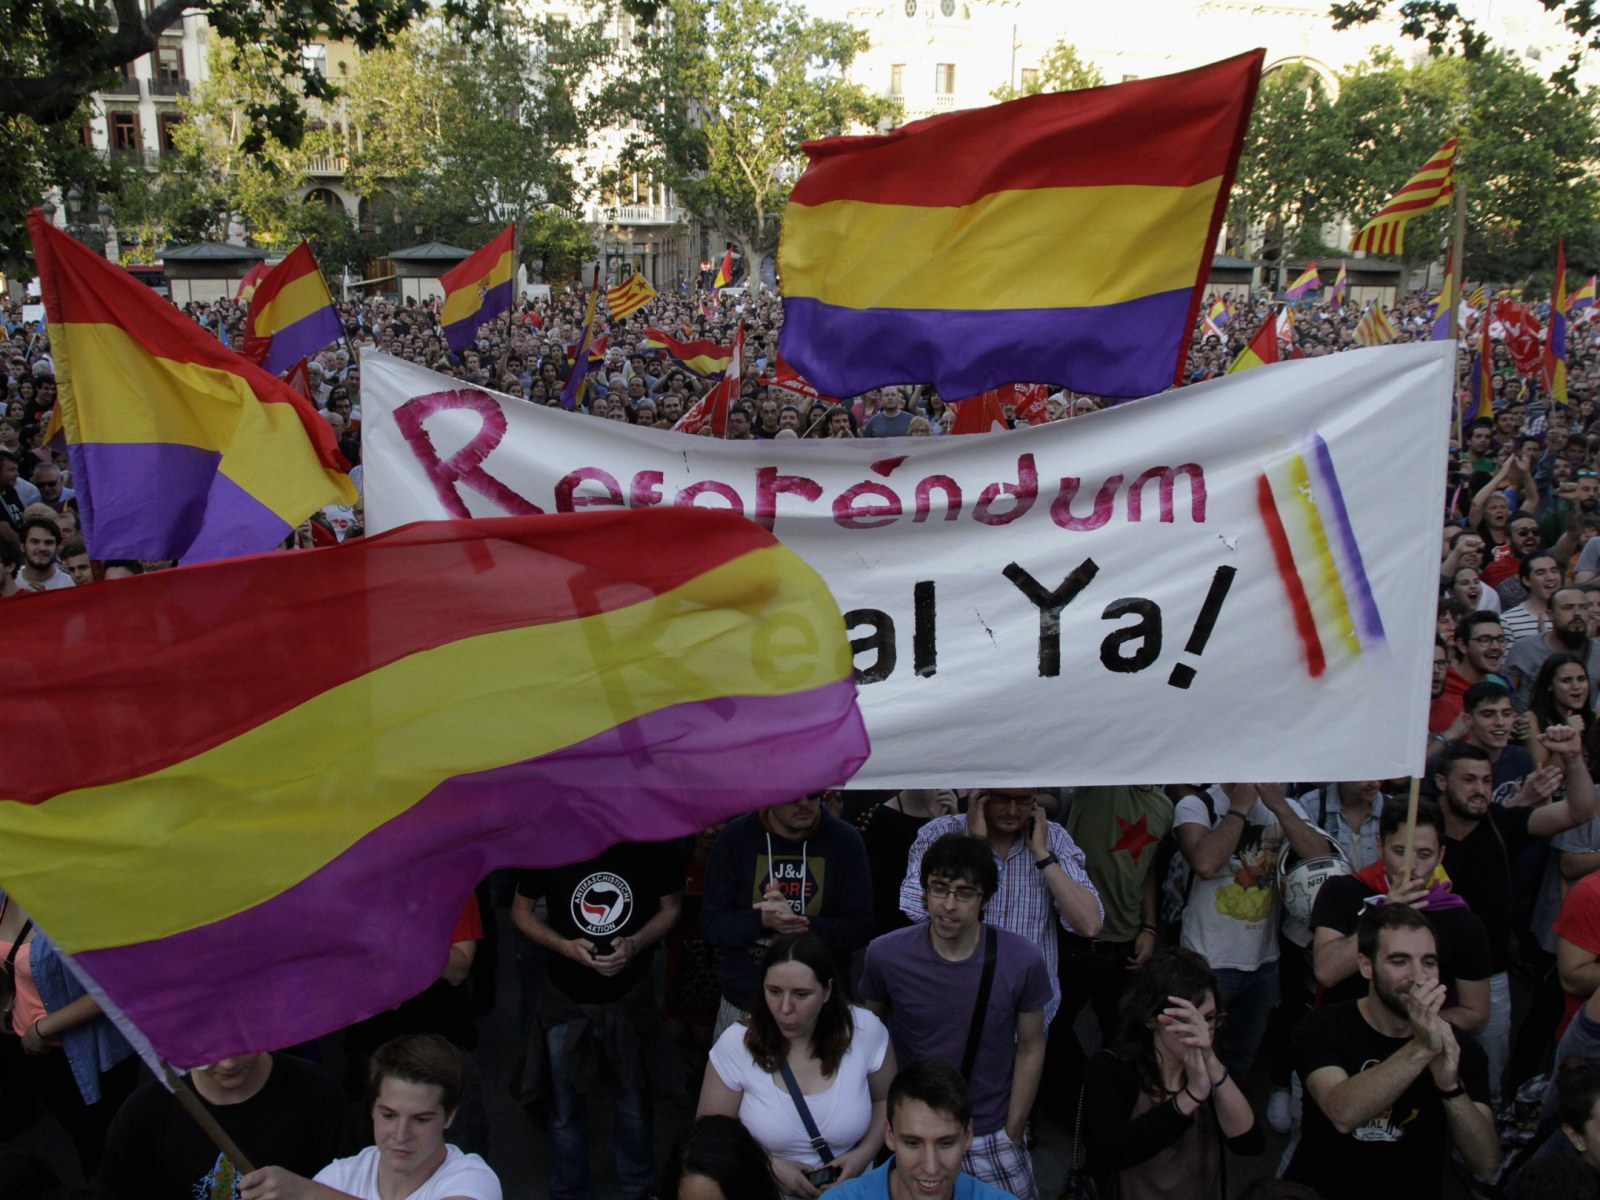 Protests Erupt Calling For Referendum On Existence Of The Spanish